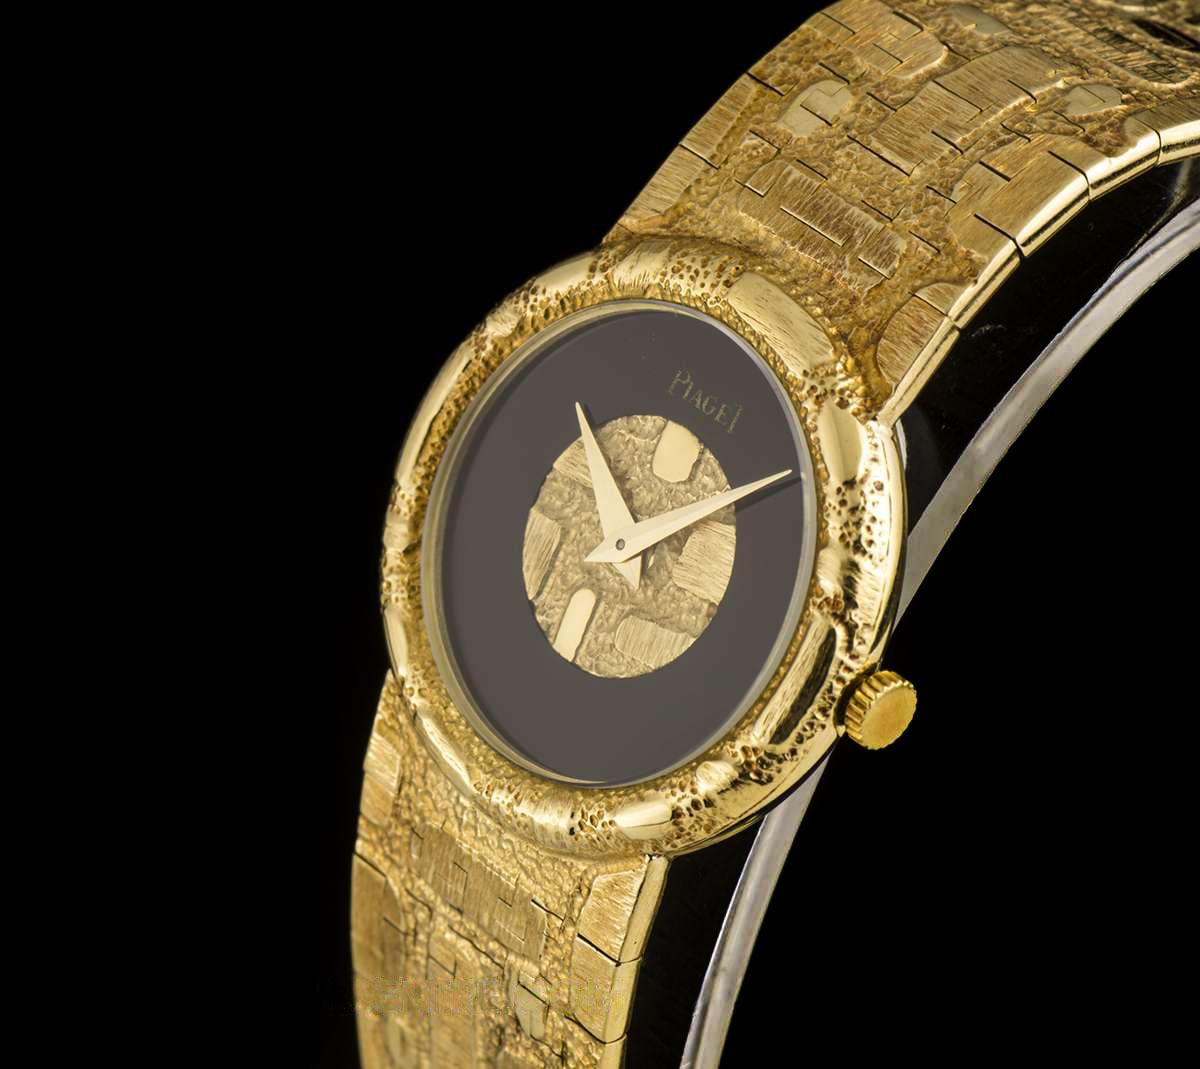 A 26 mm 18k Yellow Gold Ladies Dress Watch, onyx dial with gold insert, a fixed 18k yellow gold bezel, an 18k yellow gold integrated bracelet with an 18k yellow gold jewellery style clasp, mineral glass, manual wind movement, in excellent condition,